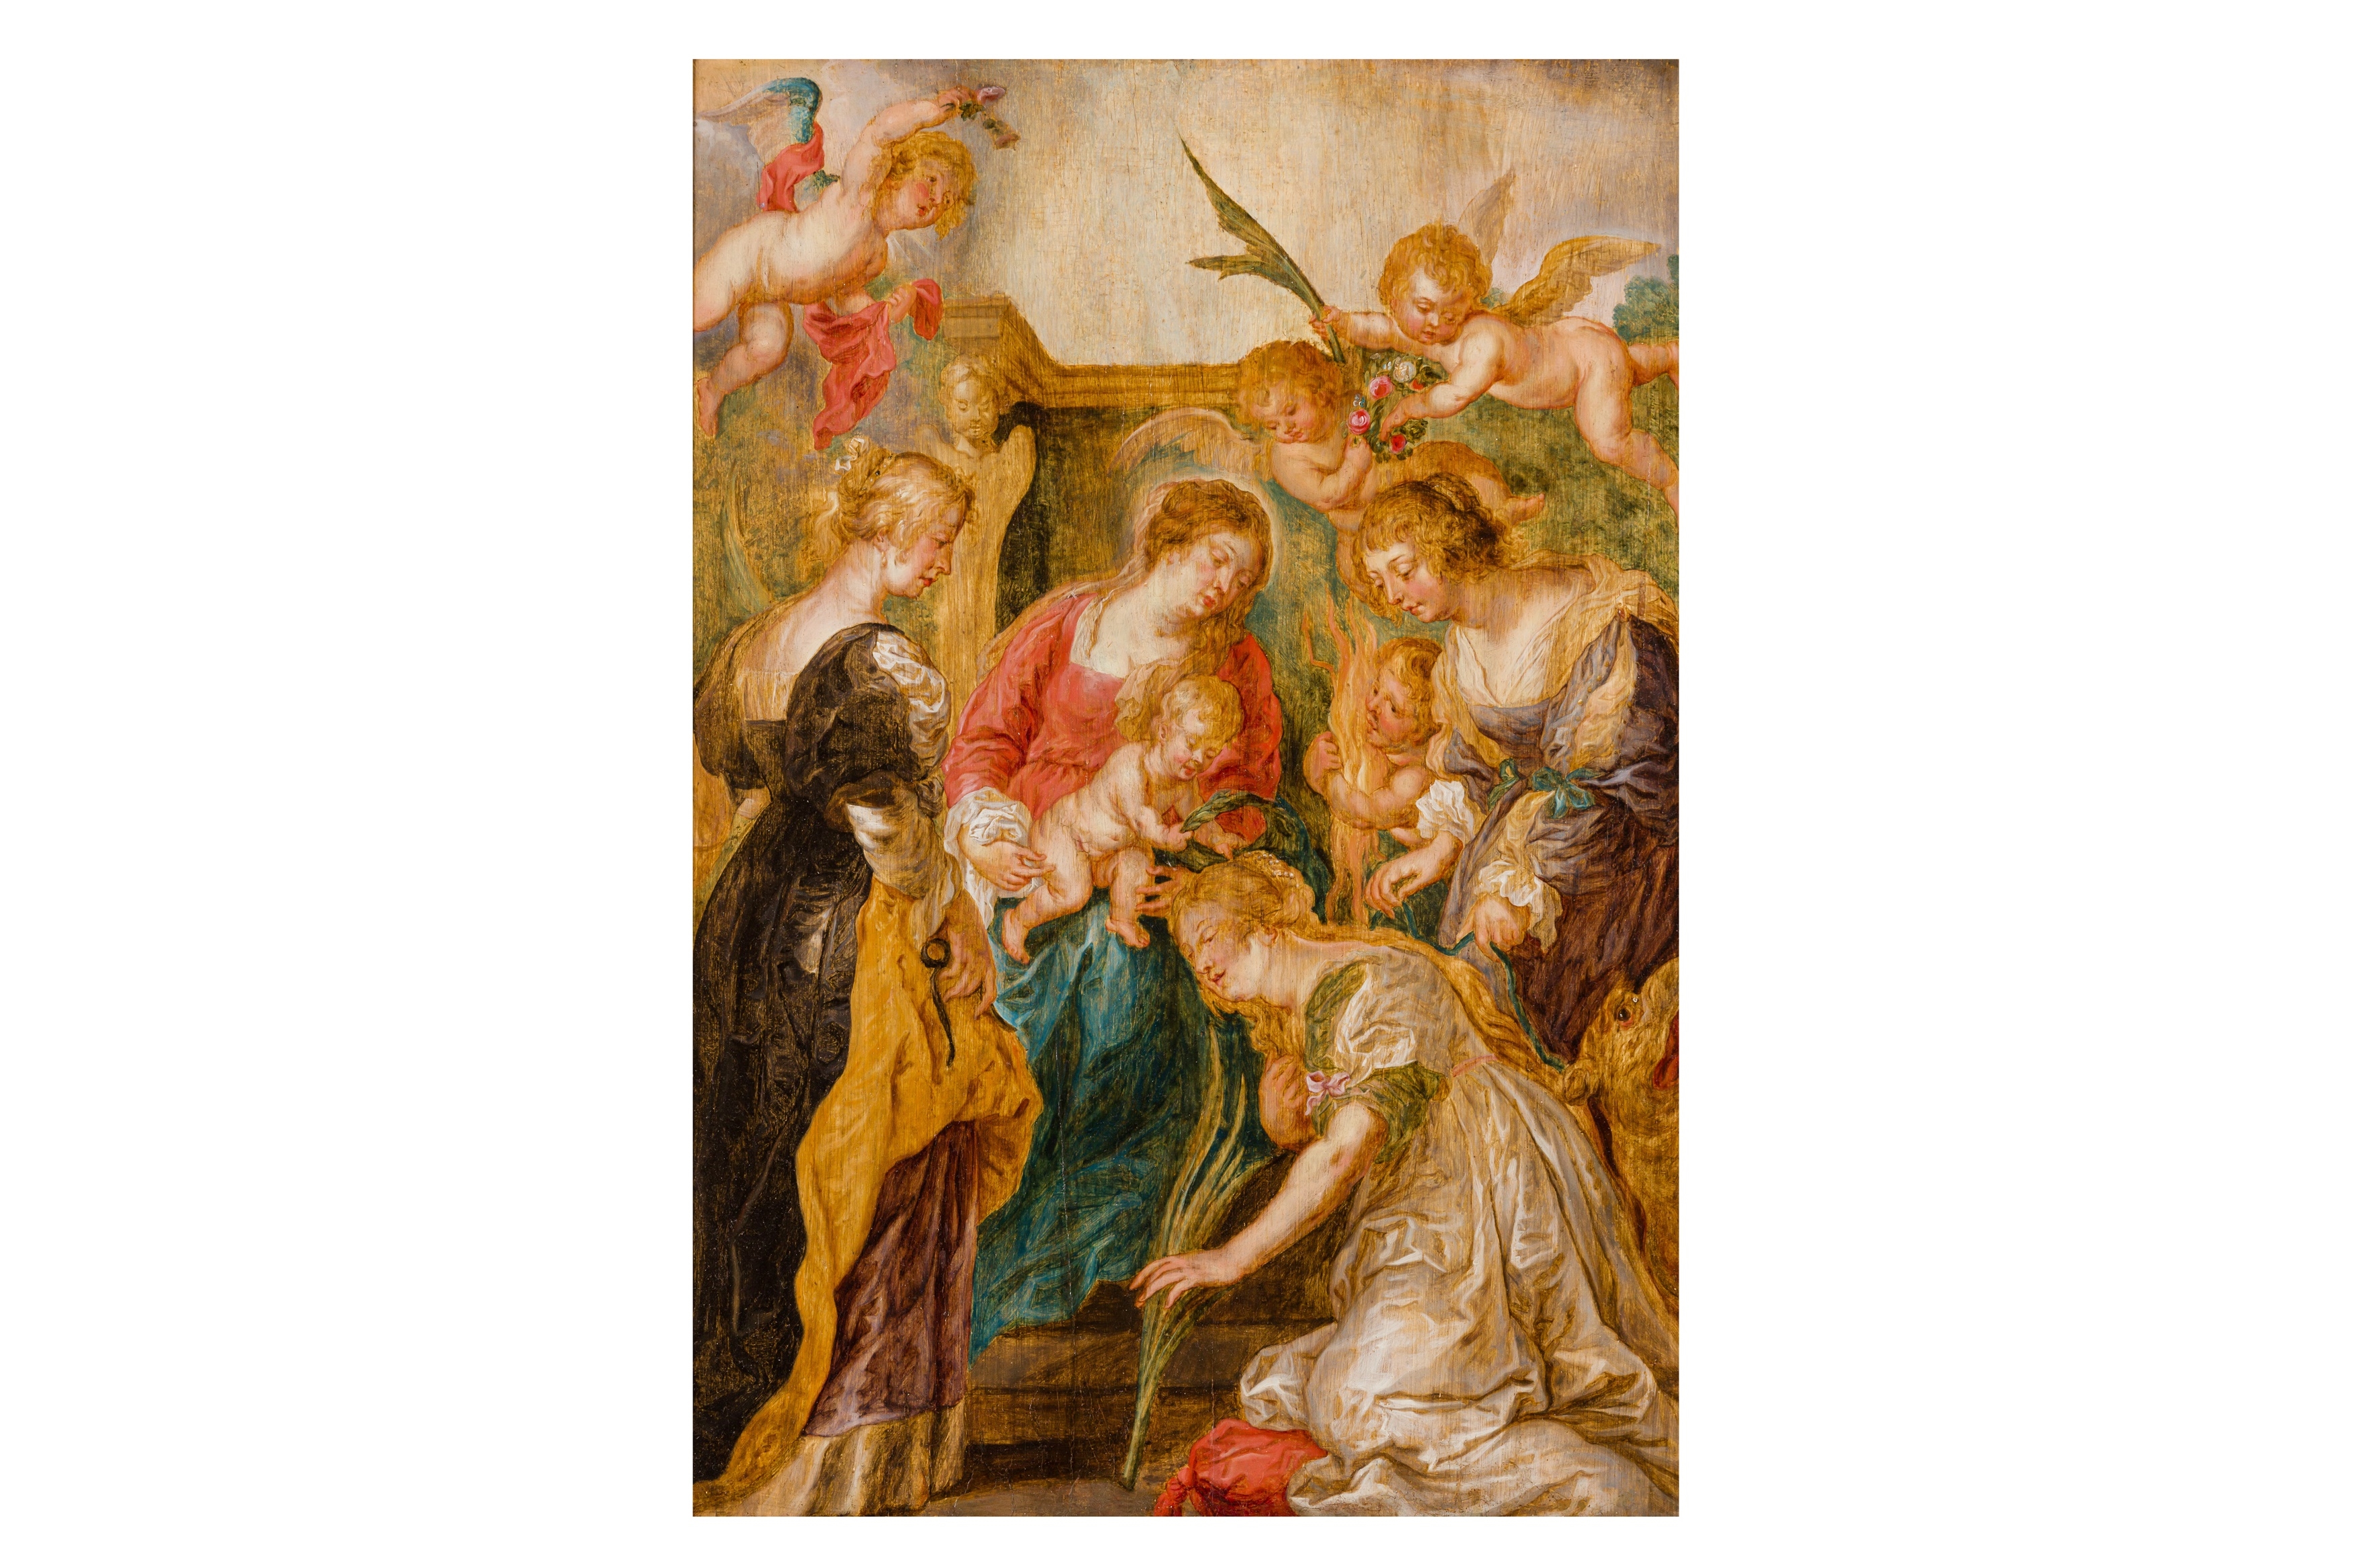 The present work is after the original by Peter Paul Rubens in the Victoria & Albert Museum - Peter Paul Rubens